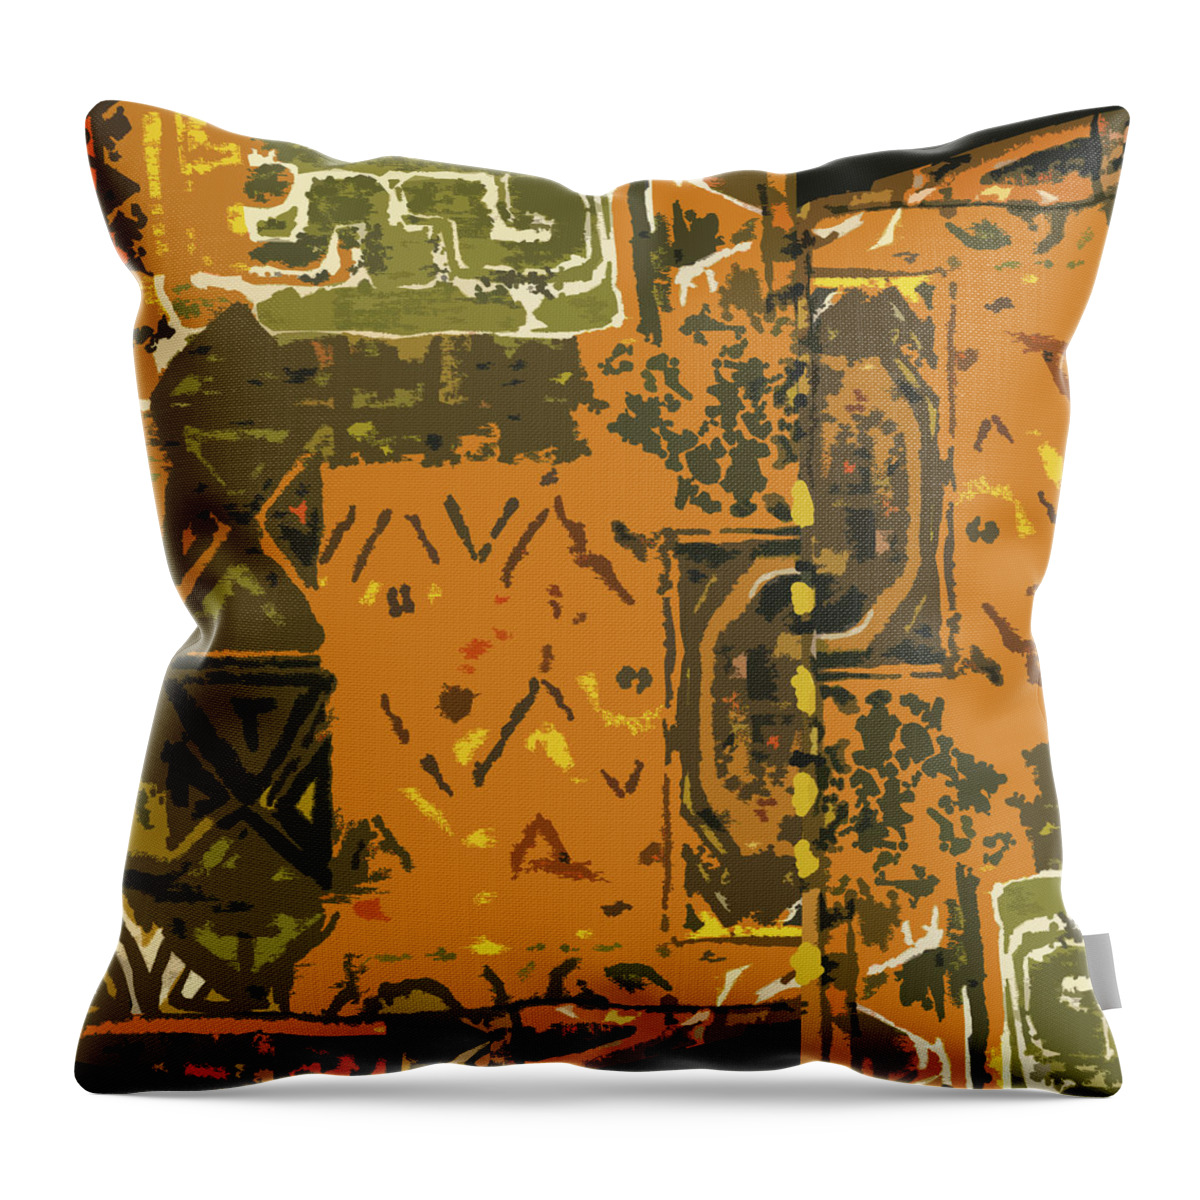 Tribal Throw Pillow featuring the mixed media Tribal Patchwork I by Nicholas Biscardi